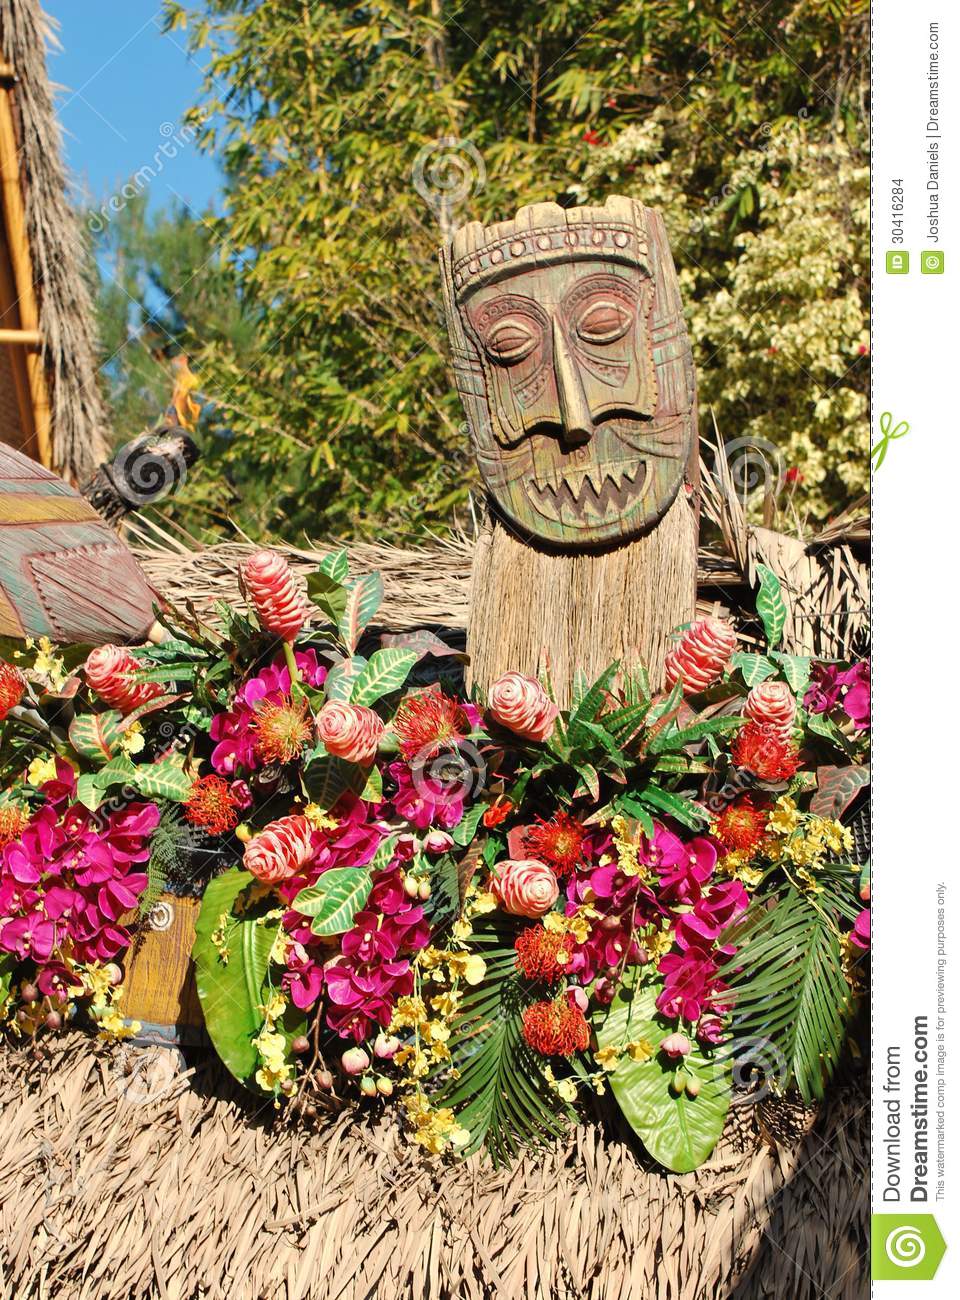 One Of The Tiki Gods Outside The Tiki Room Attraction At Disneyland